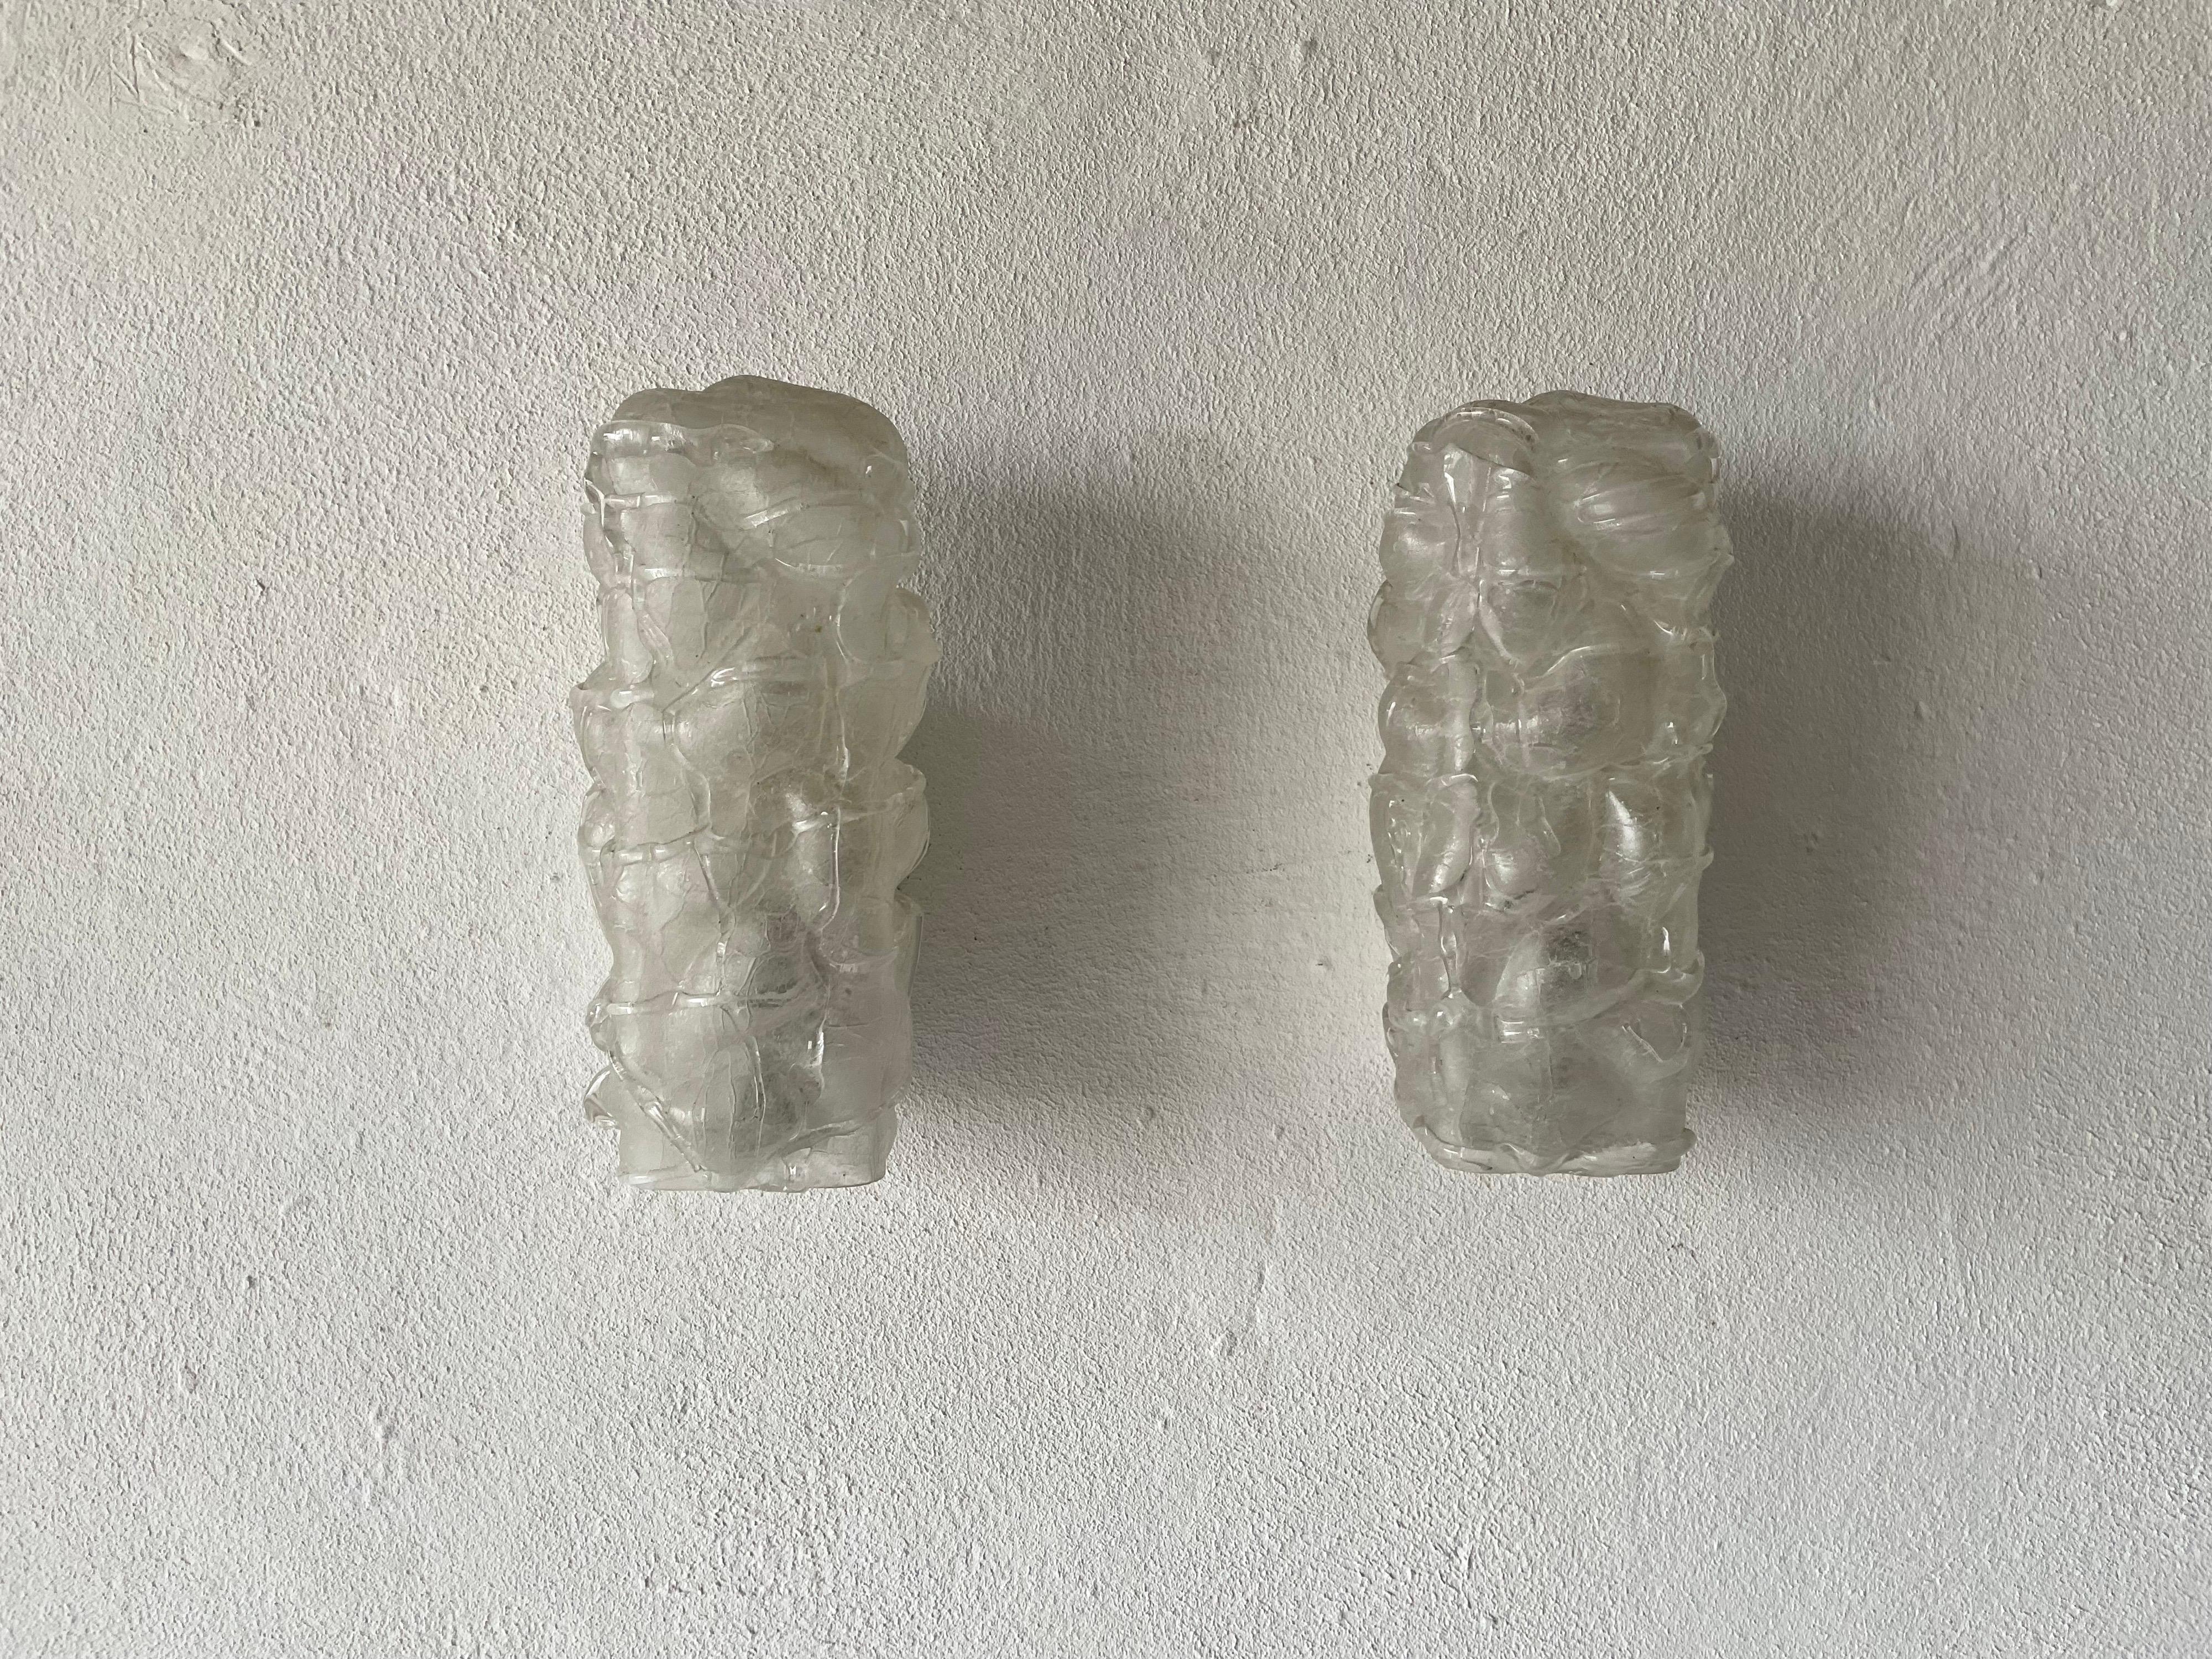 Crystal Glass in exceptional shape pair of rare sconces by Doria, 1960s, Germany

Very elegant and Minimalist wall lamps

Lamps are in very good condition.

These lamps works with E14 standard light bulbs. Each lamp works with 1 light bulb.